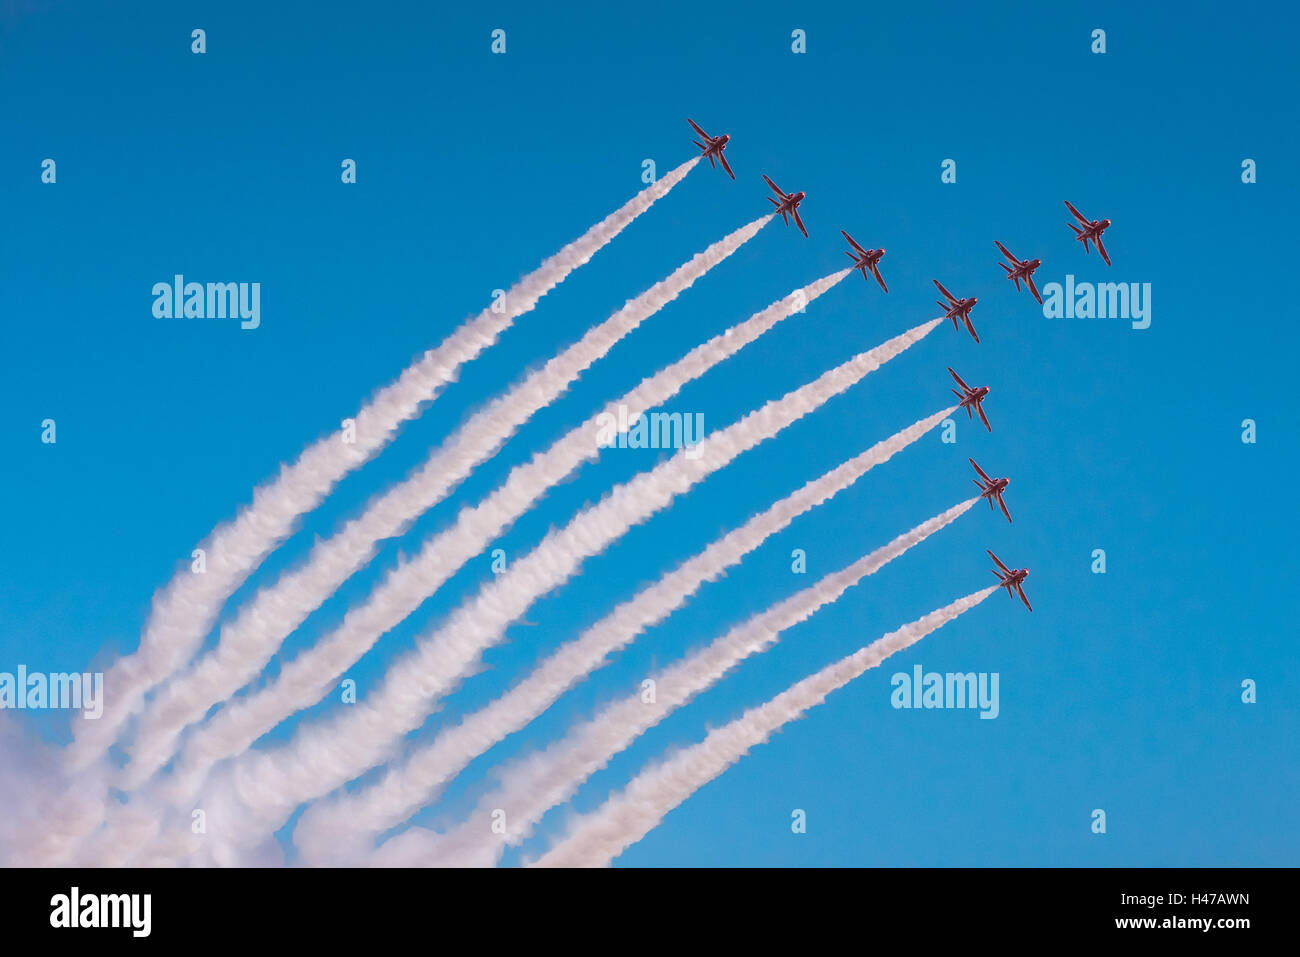 The RAF display team in their Hawk jets in one of their precision flying formations, known as the Swan. Stock Photo